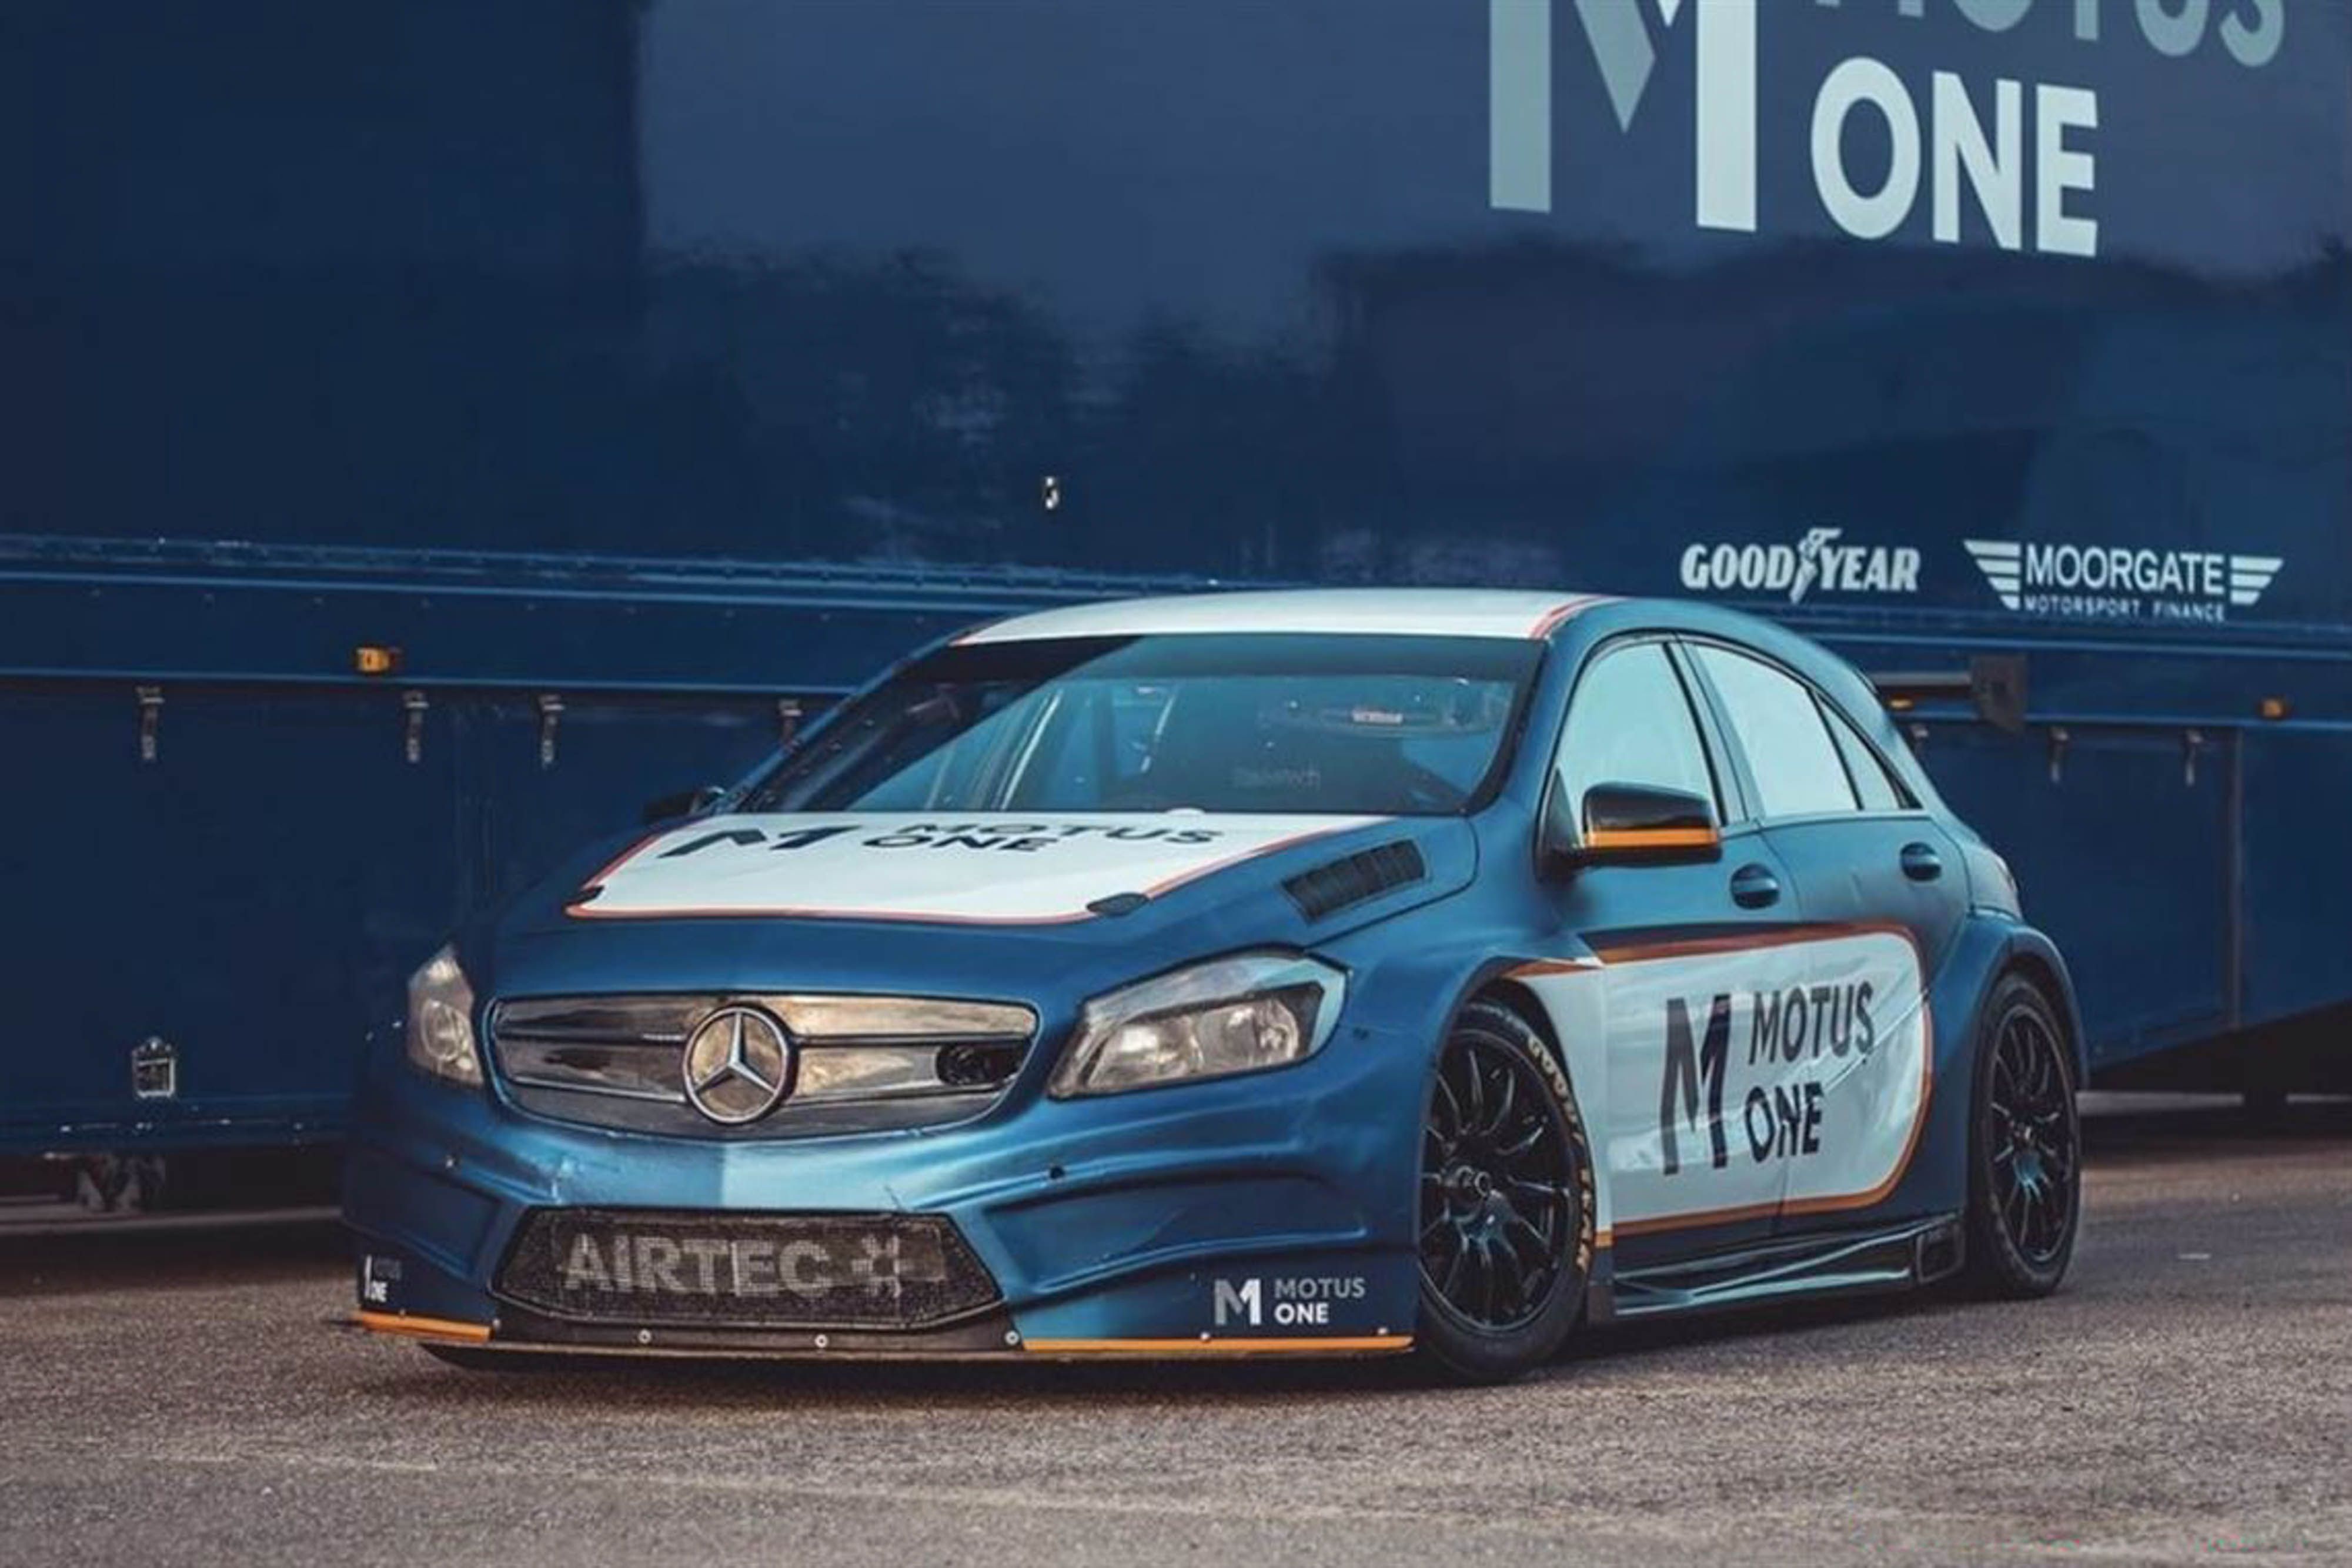 2014 Mercedes-AMG (メルセデス・ベンツ) A Class NGTC